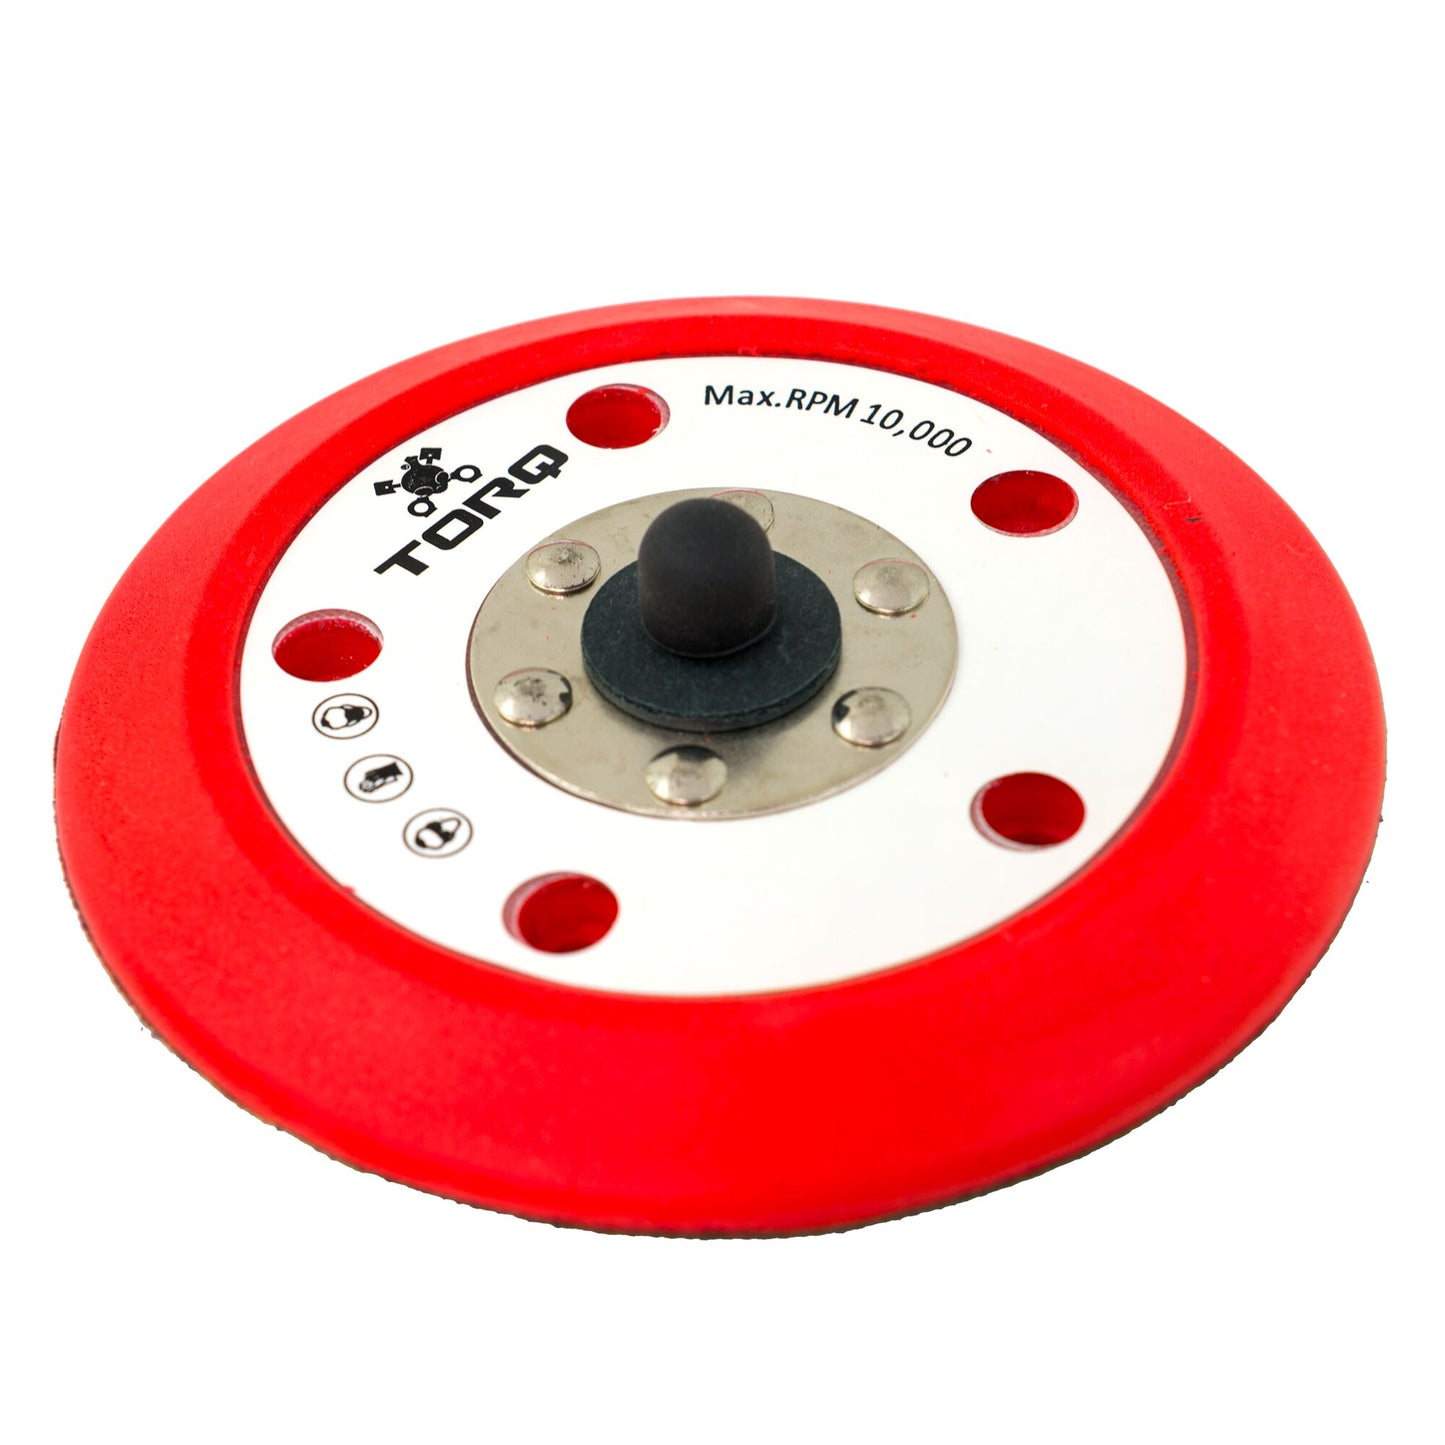 TORQ R5 Dual Action Backing Plate with Hyper Flex Technology